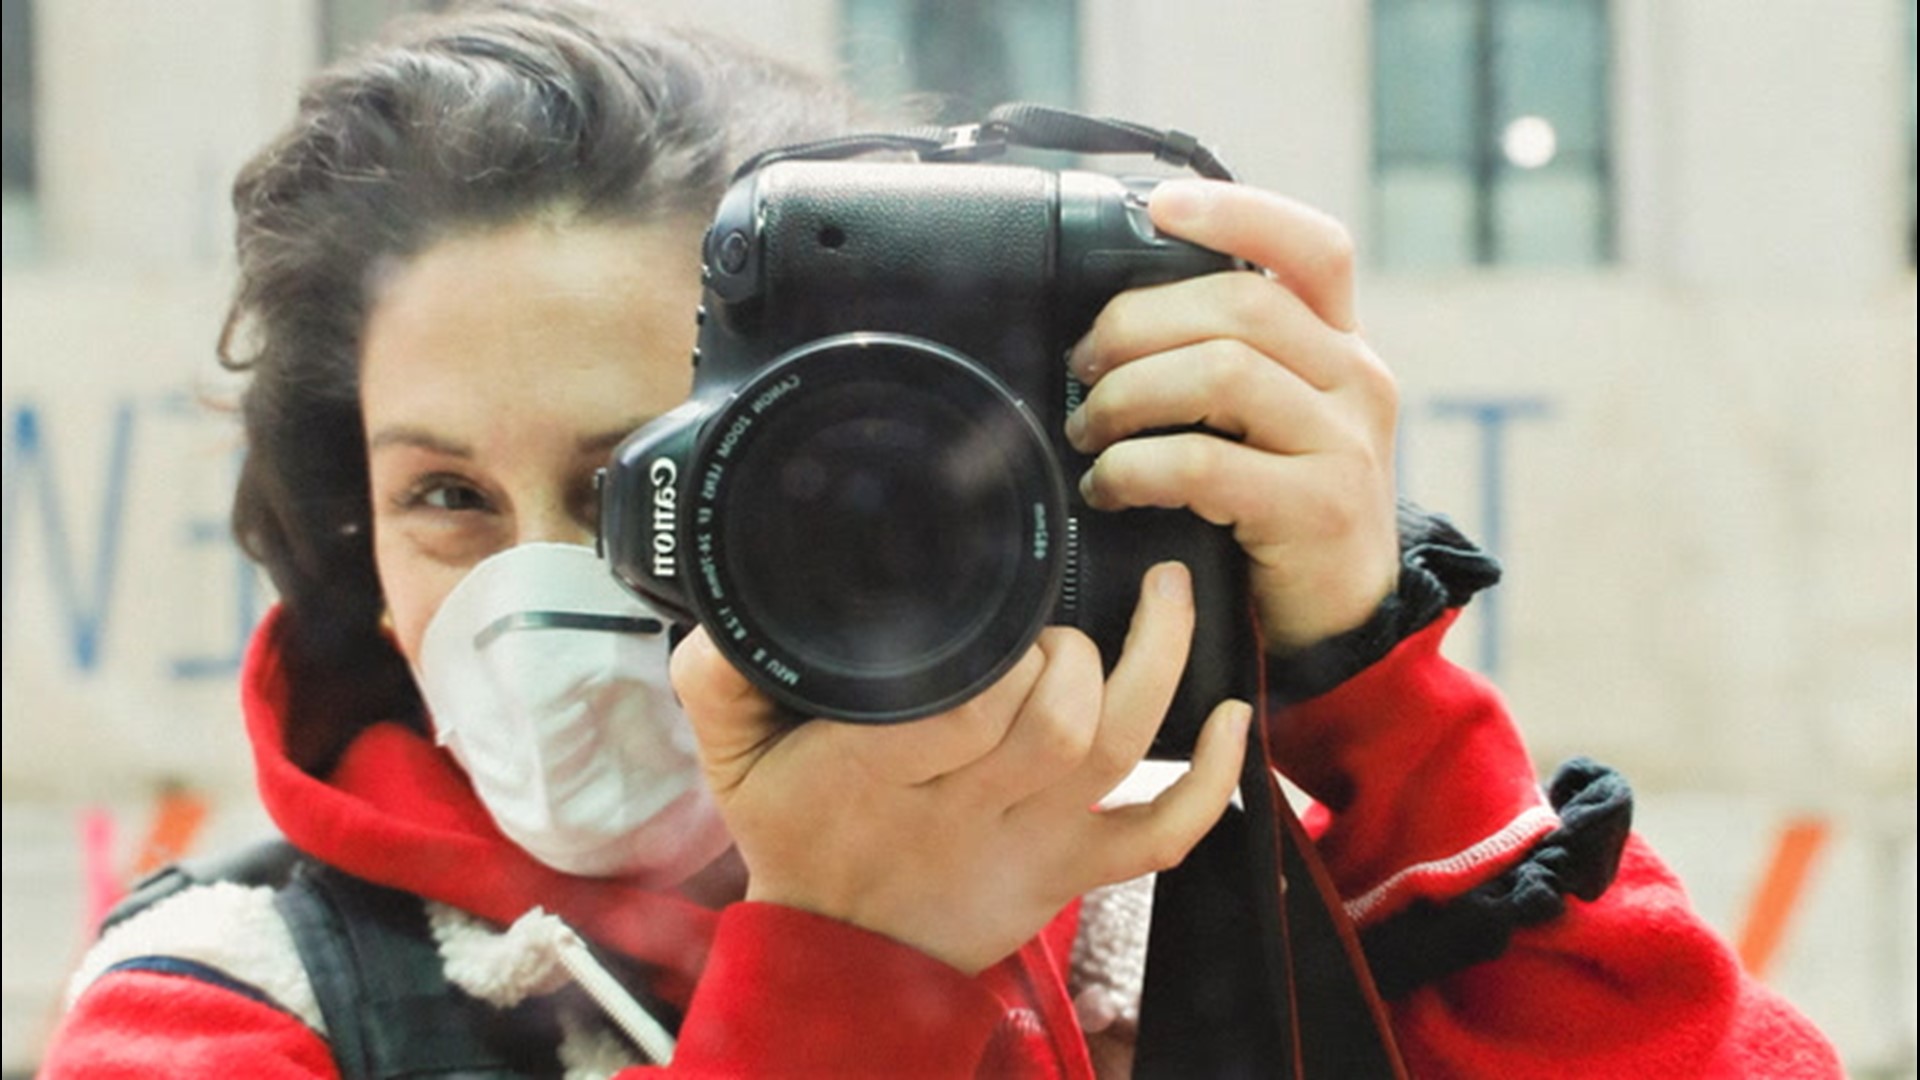 Because of the COVID-19 pandemic, people's faces have been covered by their masks. A street photographer in New York is capturing the smiles behind the masks.